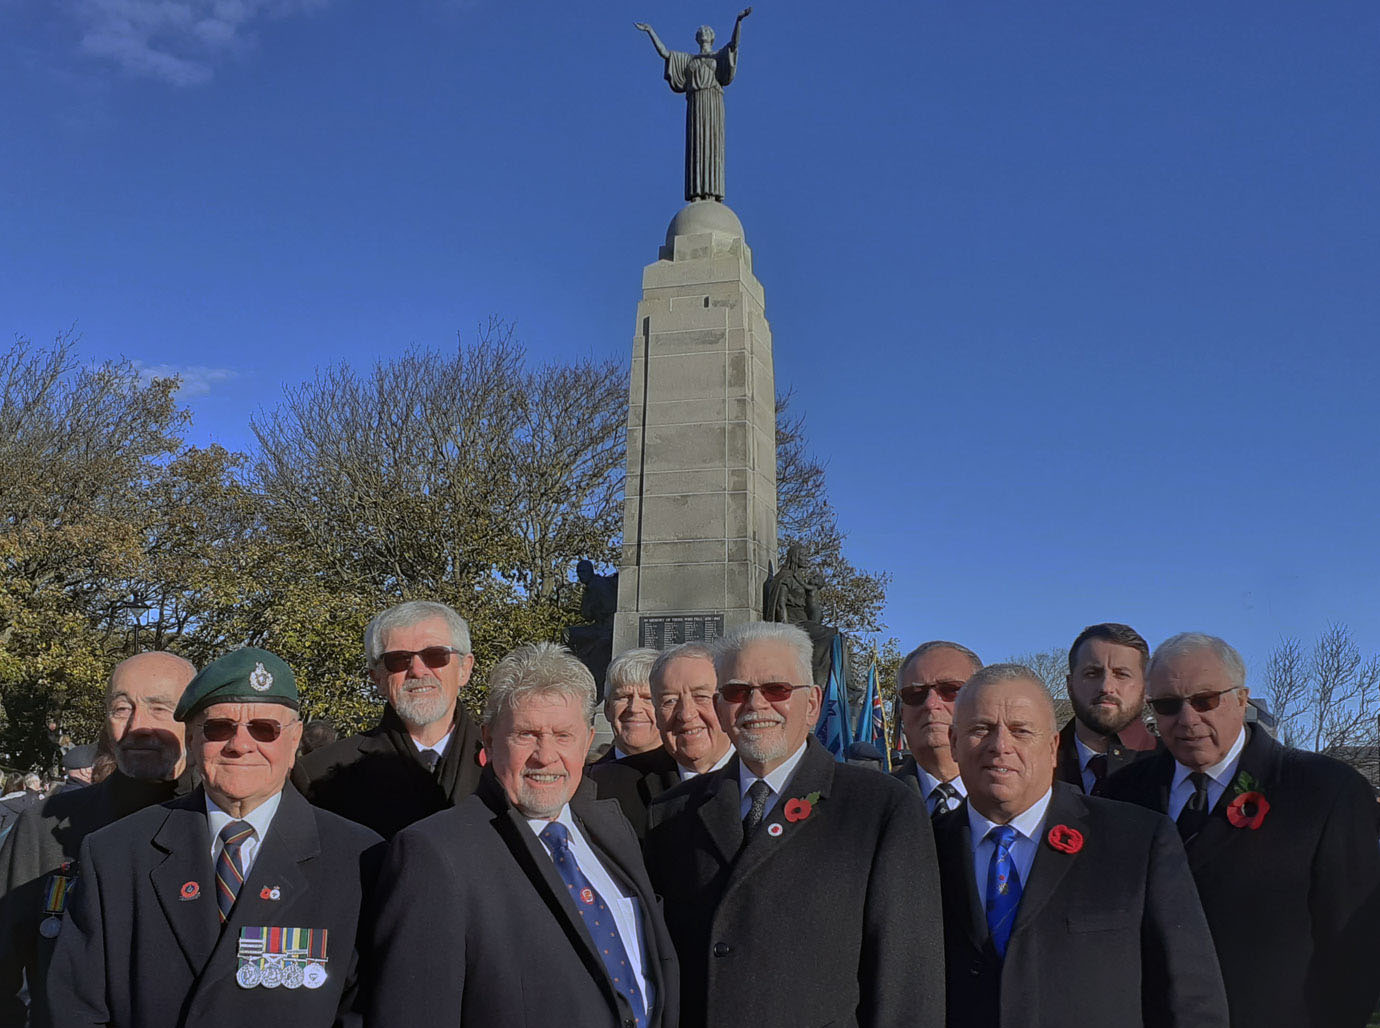 South Fylde Group Freemasons in front of the War Memorial following the laying of poppy wreaths